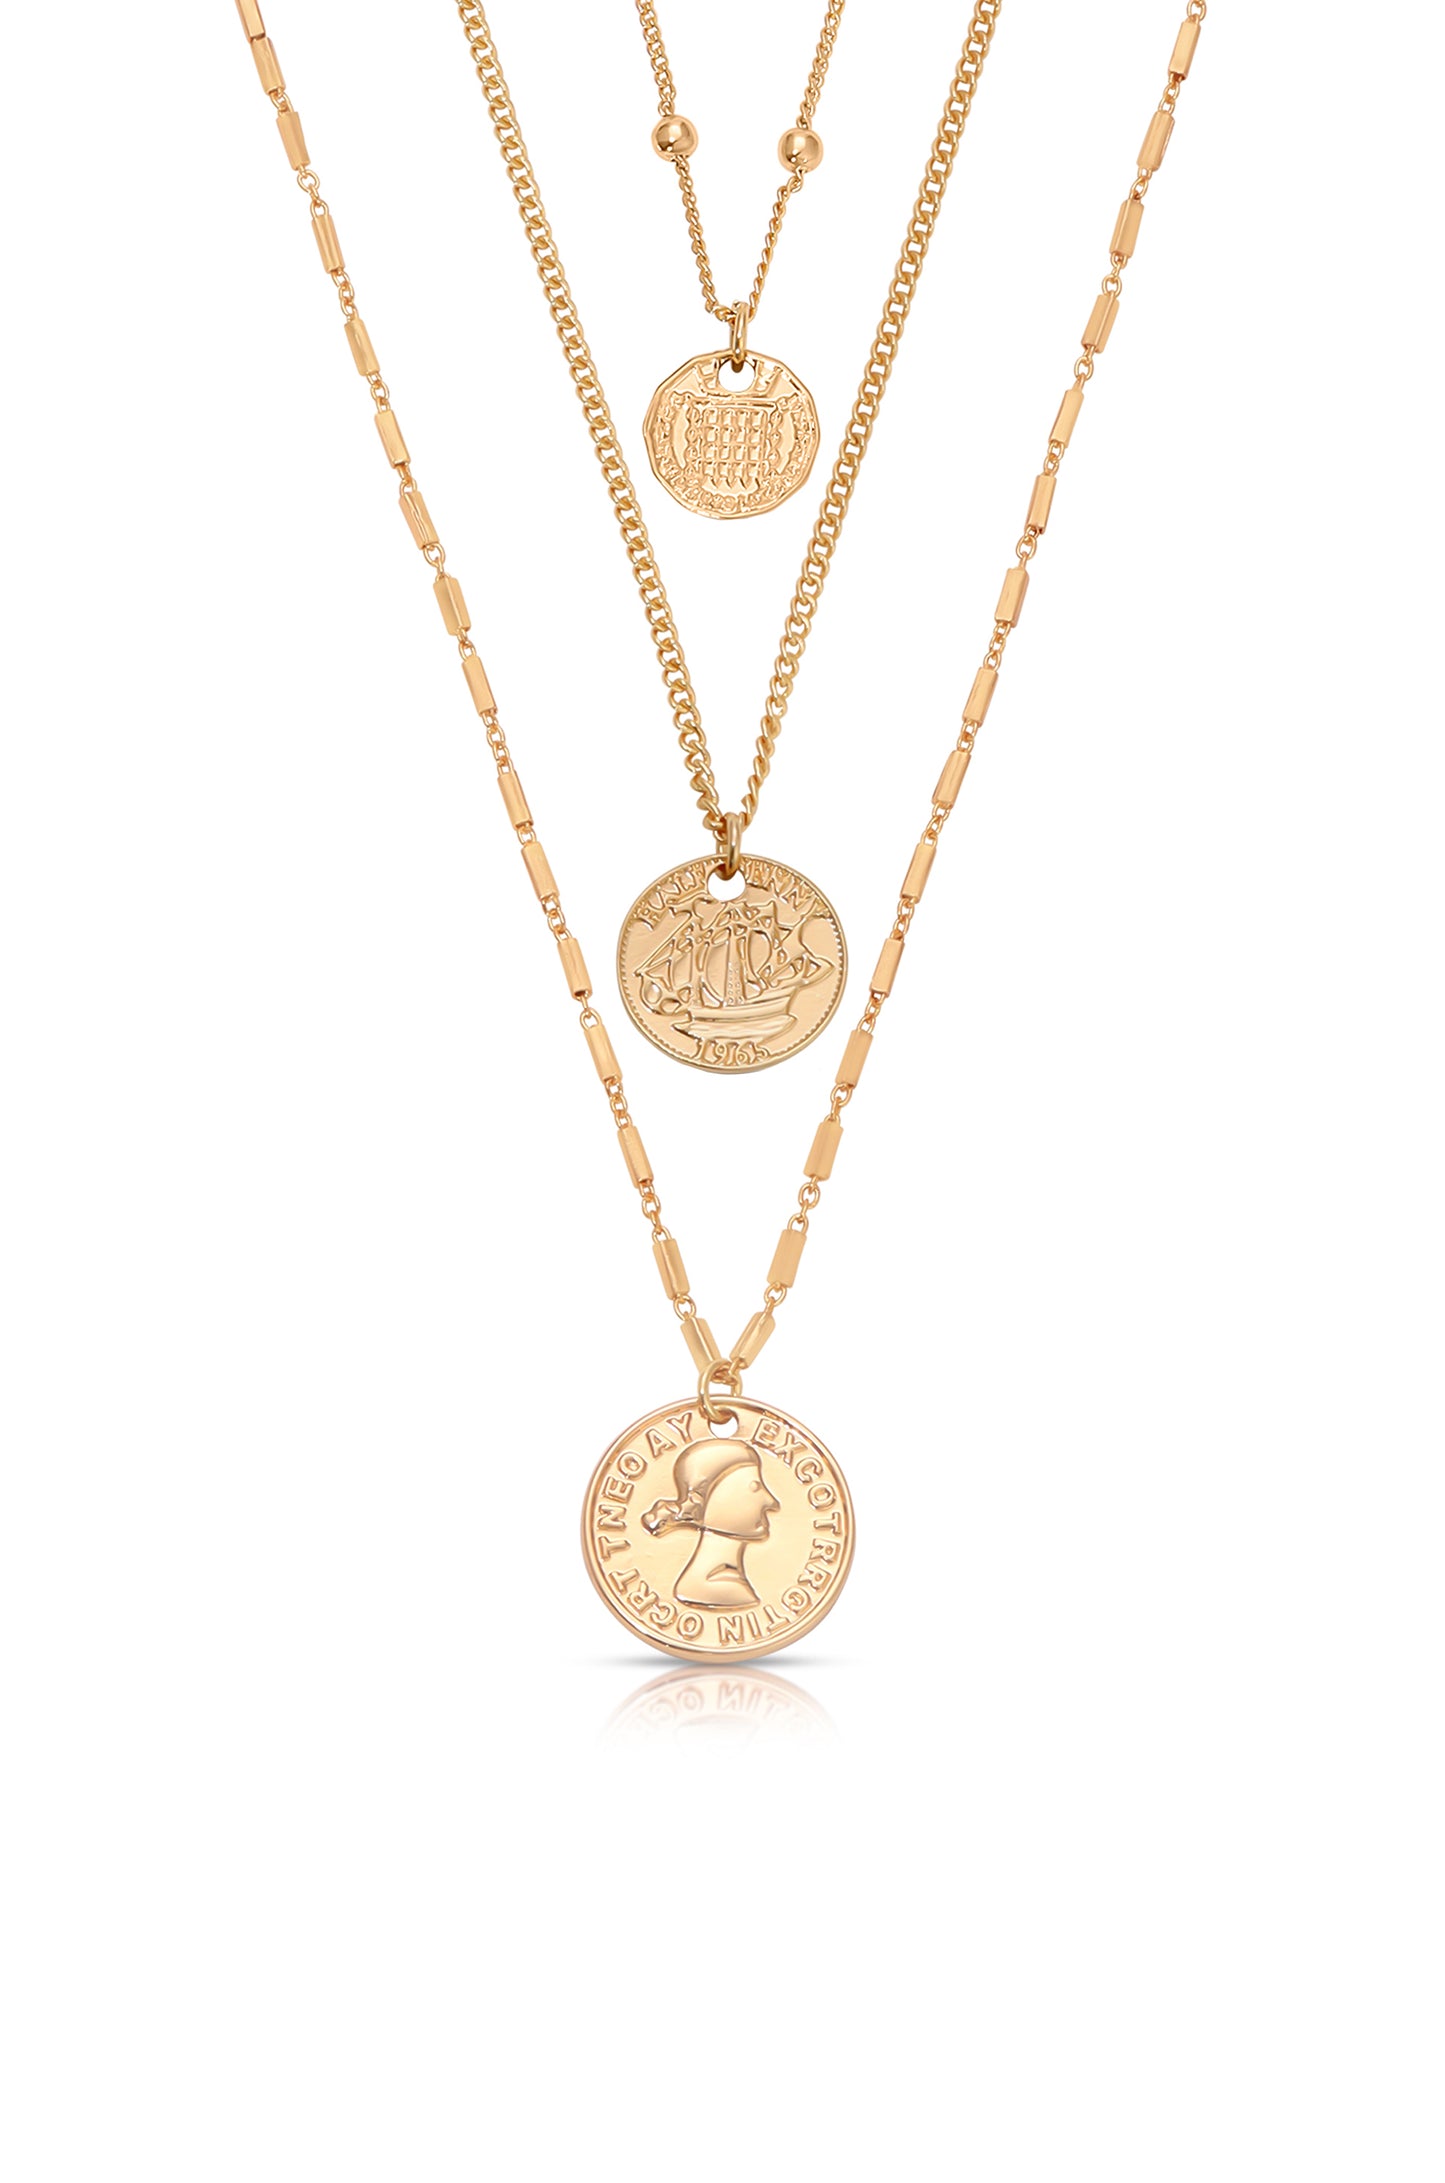 Three Coins Necklace Set in gold